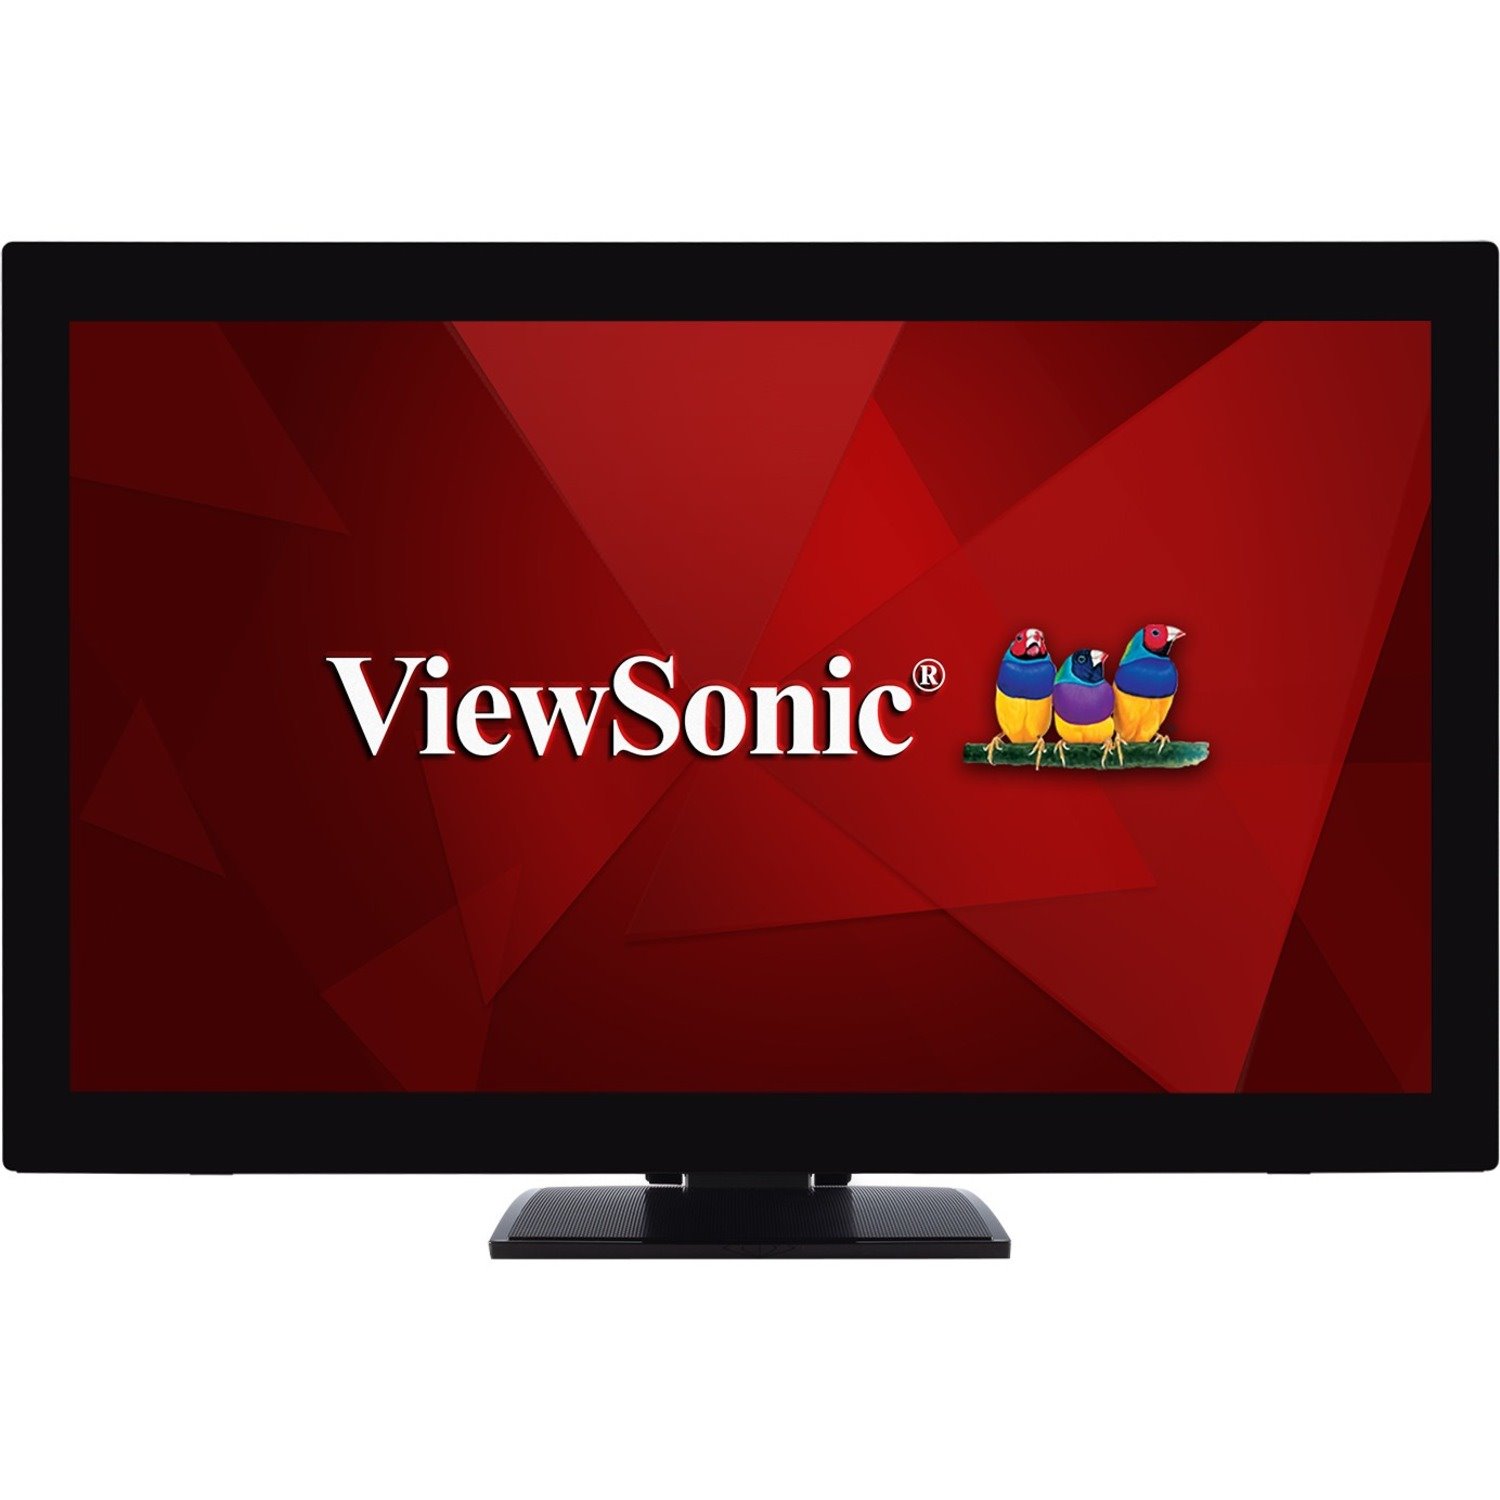 ViewSonic TD2760 27" 1080p Ergonomic 10-Point Multi Touch Monitor with RS232, HDMI, and DP